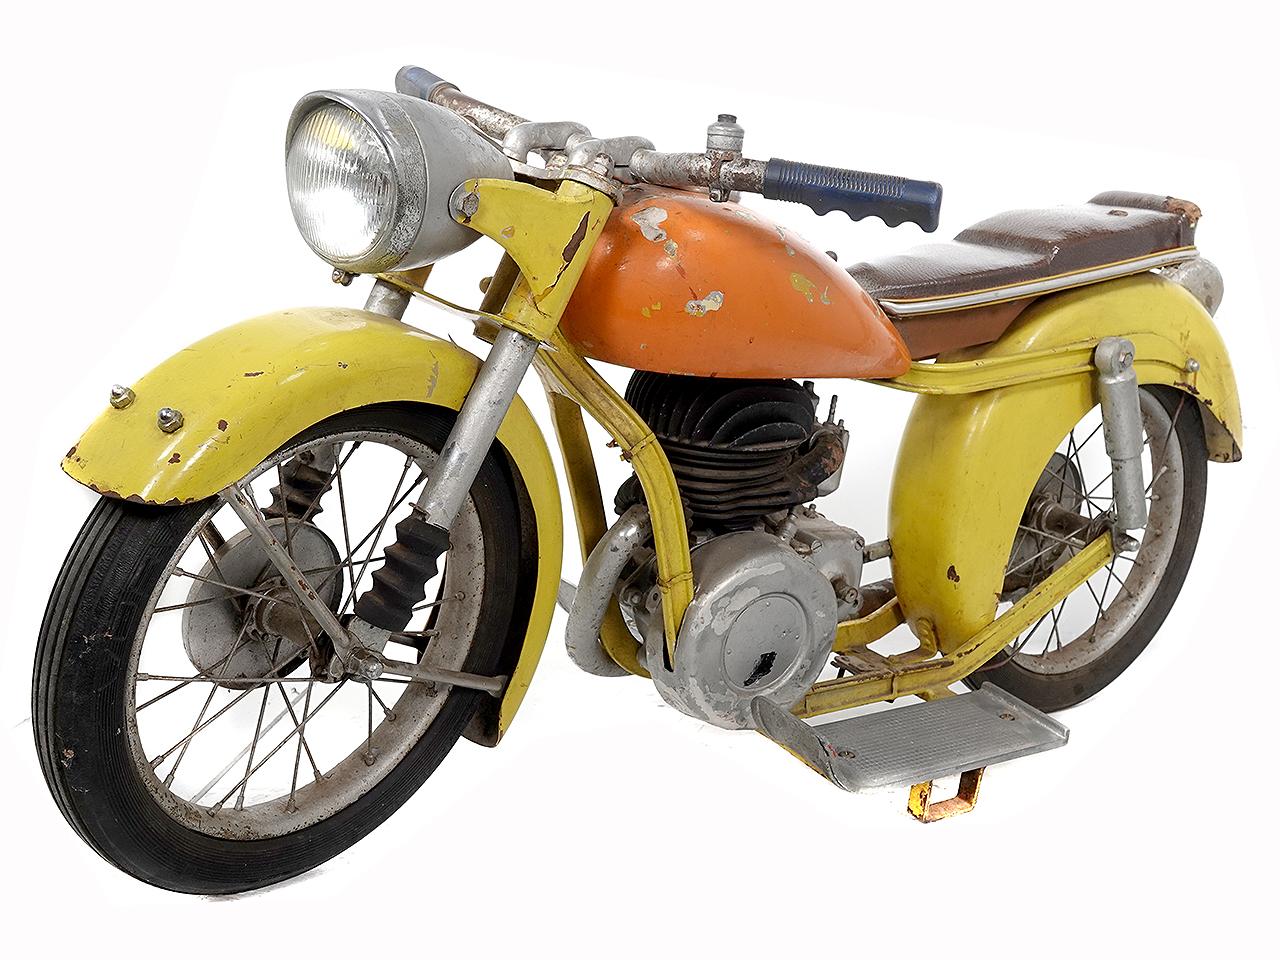 This item is a lot smaller than it looks in the pictures. The handlebars are less that 2 foot tall. Its sized for a small child but has the proportions of a full size motorcycle. Thats what I like best about it. Its a 1950s Small Horex Motorcycle